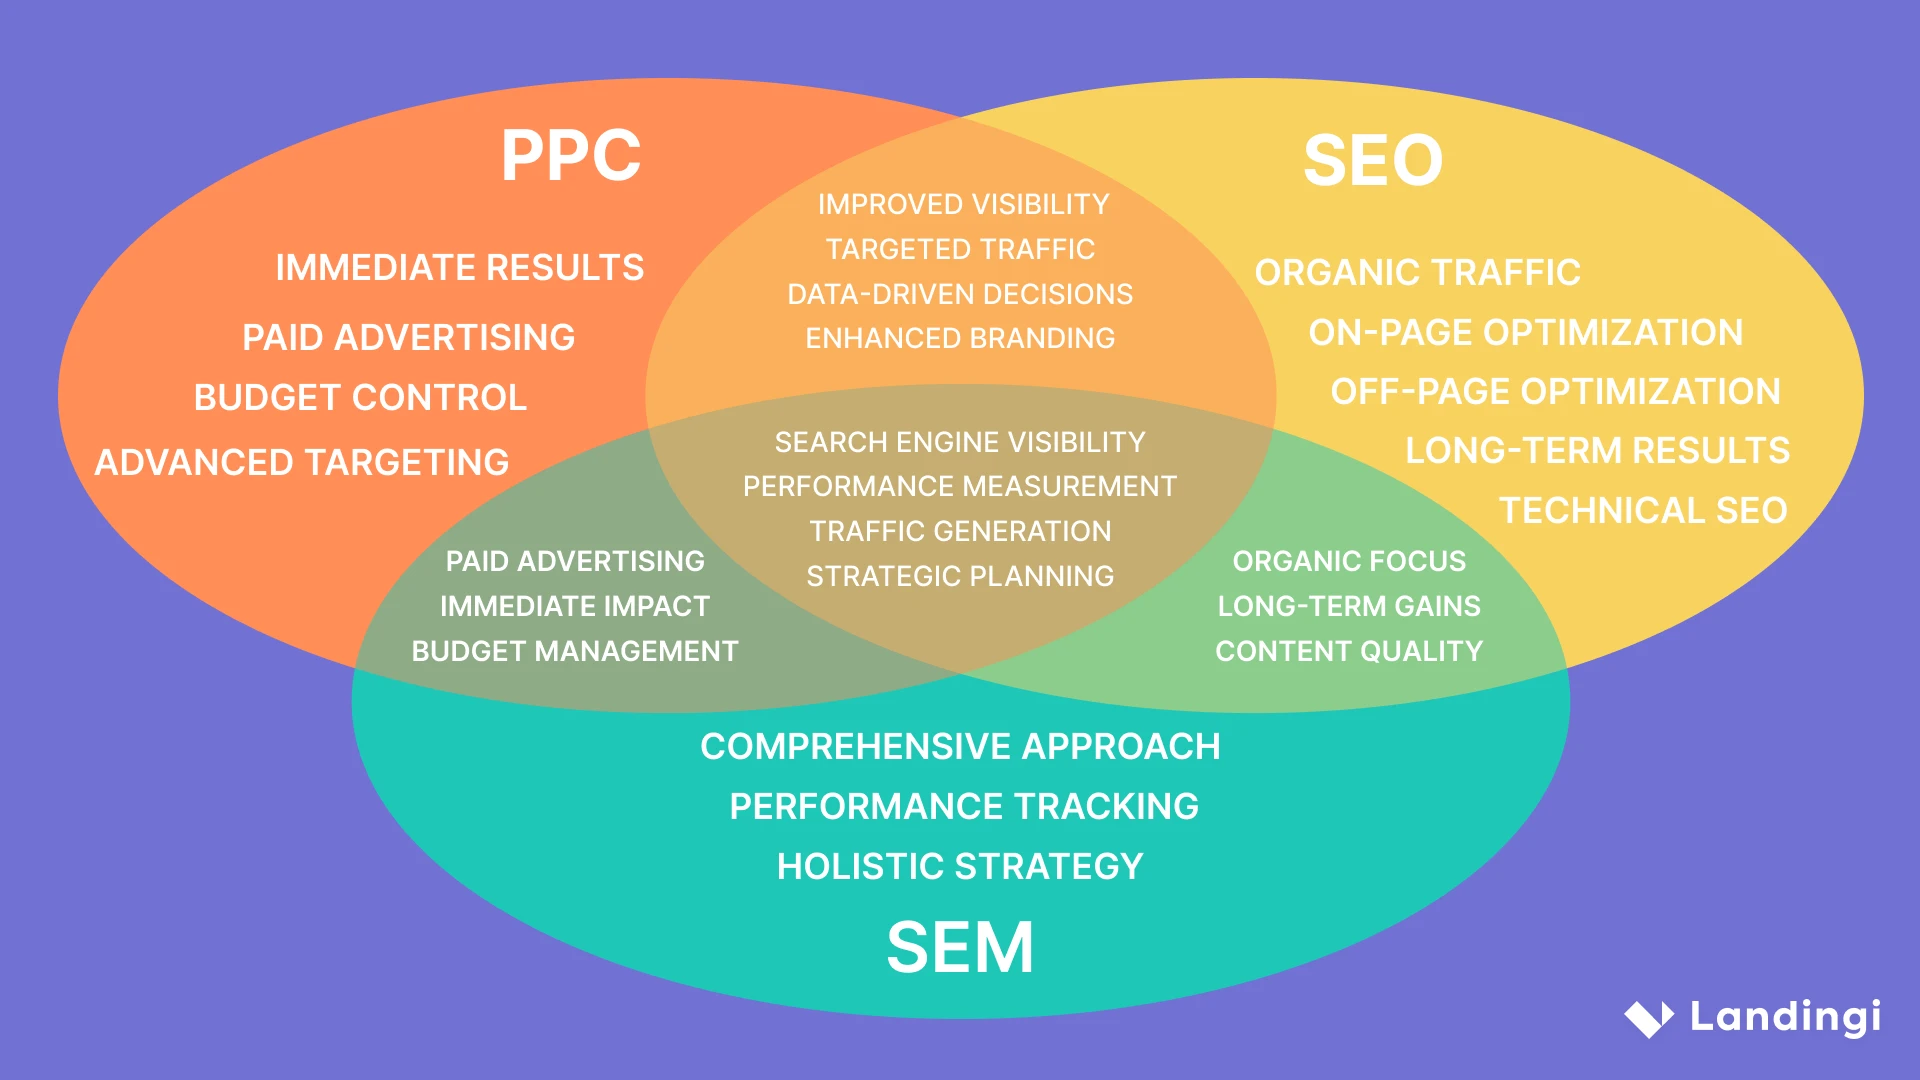 Differences and similarities between PPC, SEO, and SEM